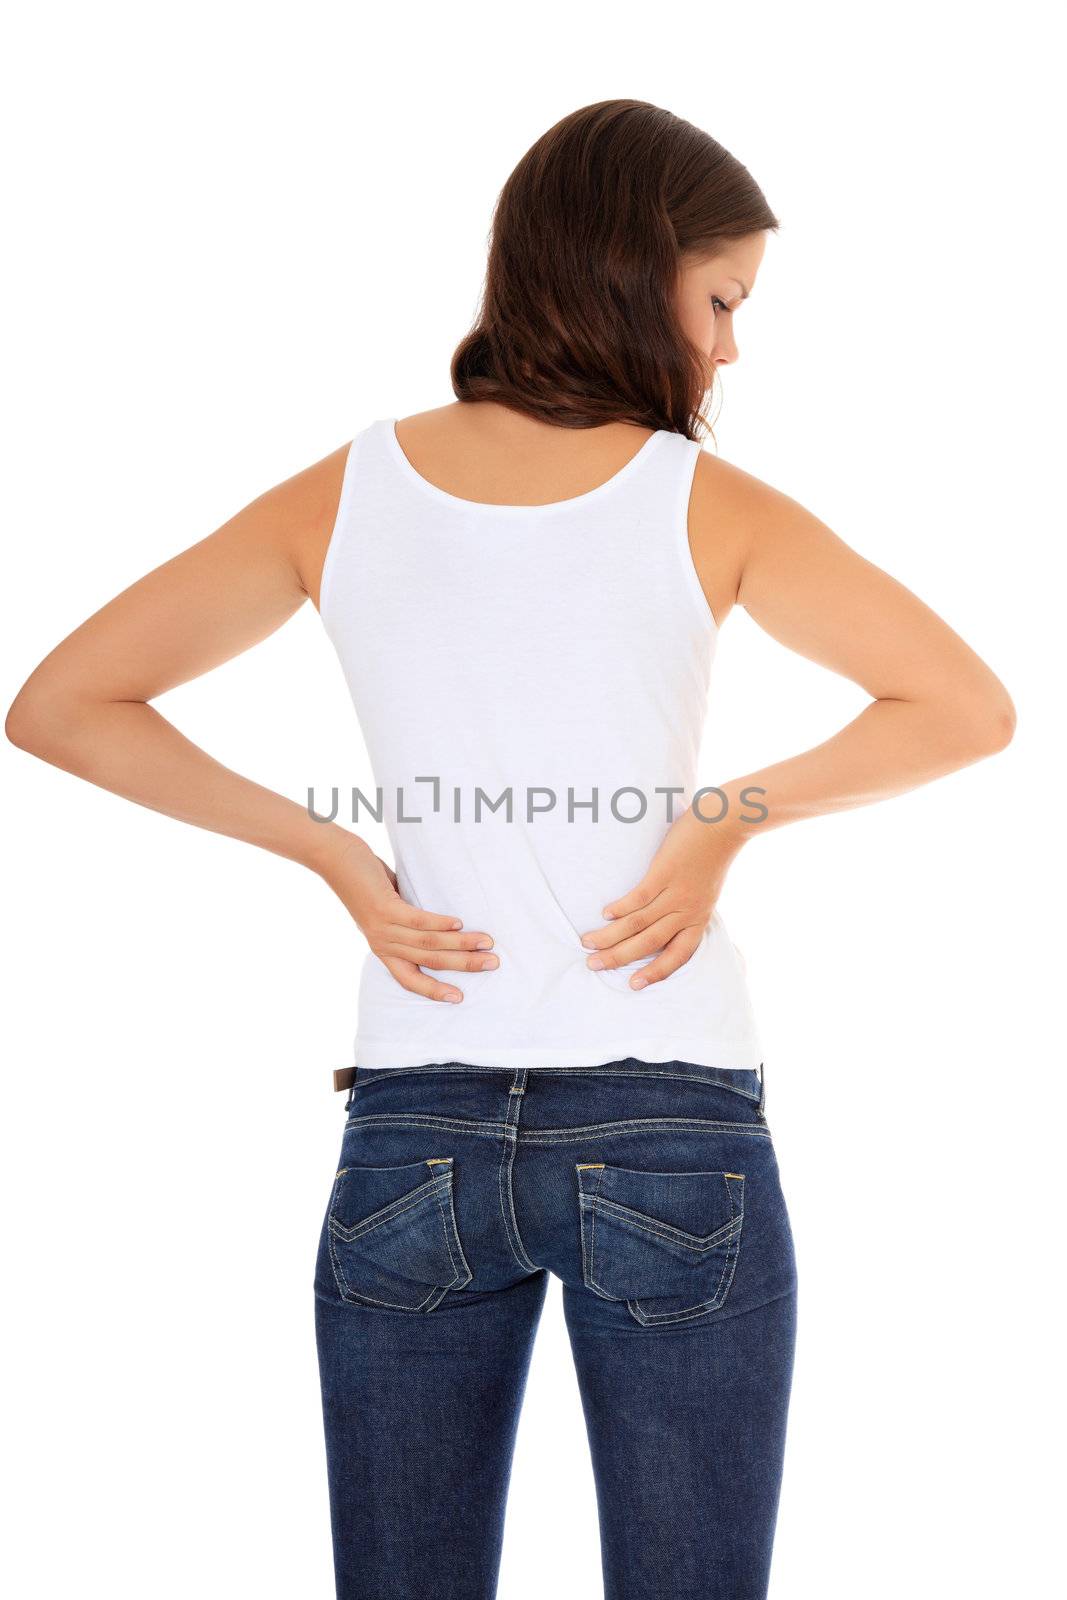 woman suffers from back pain by kaarsten